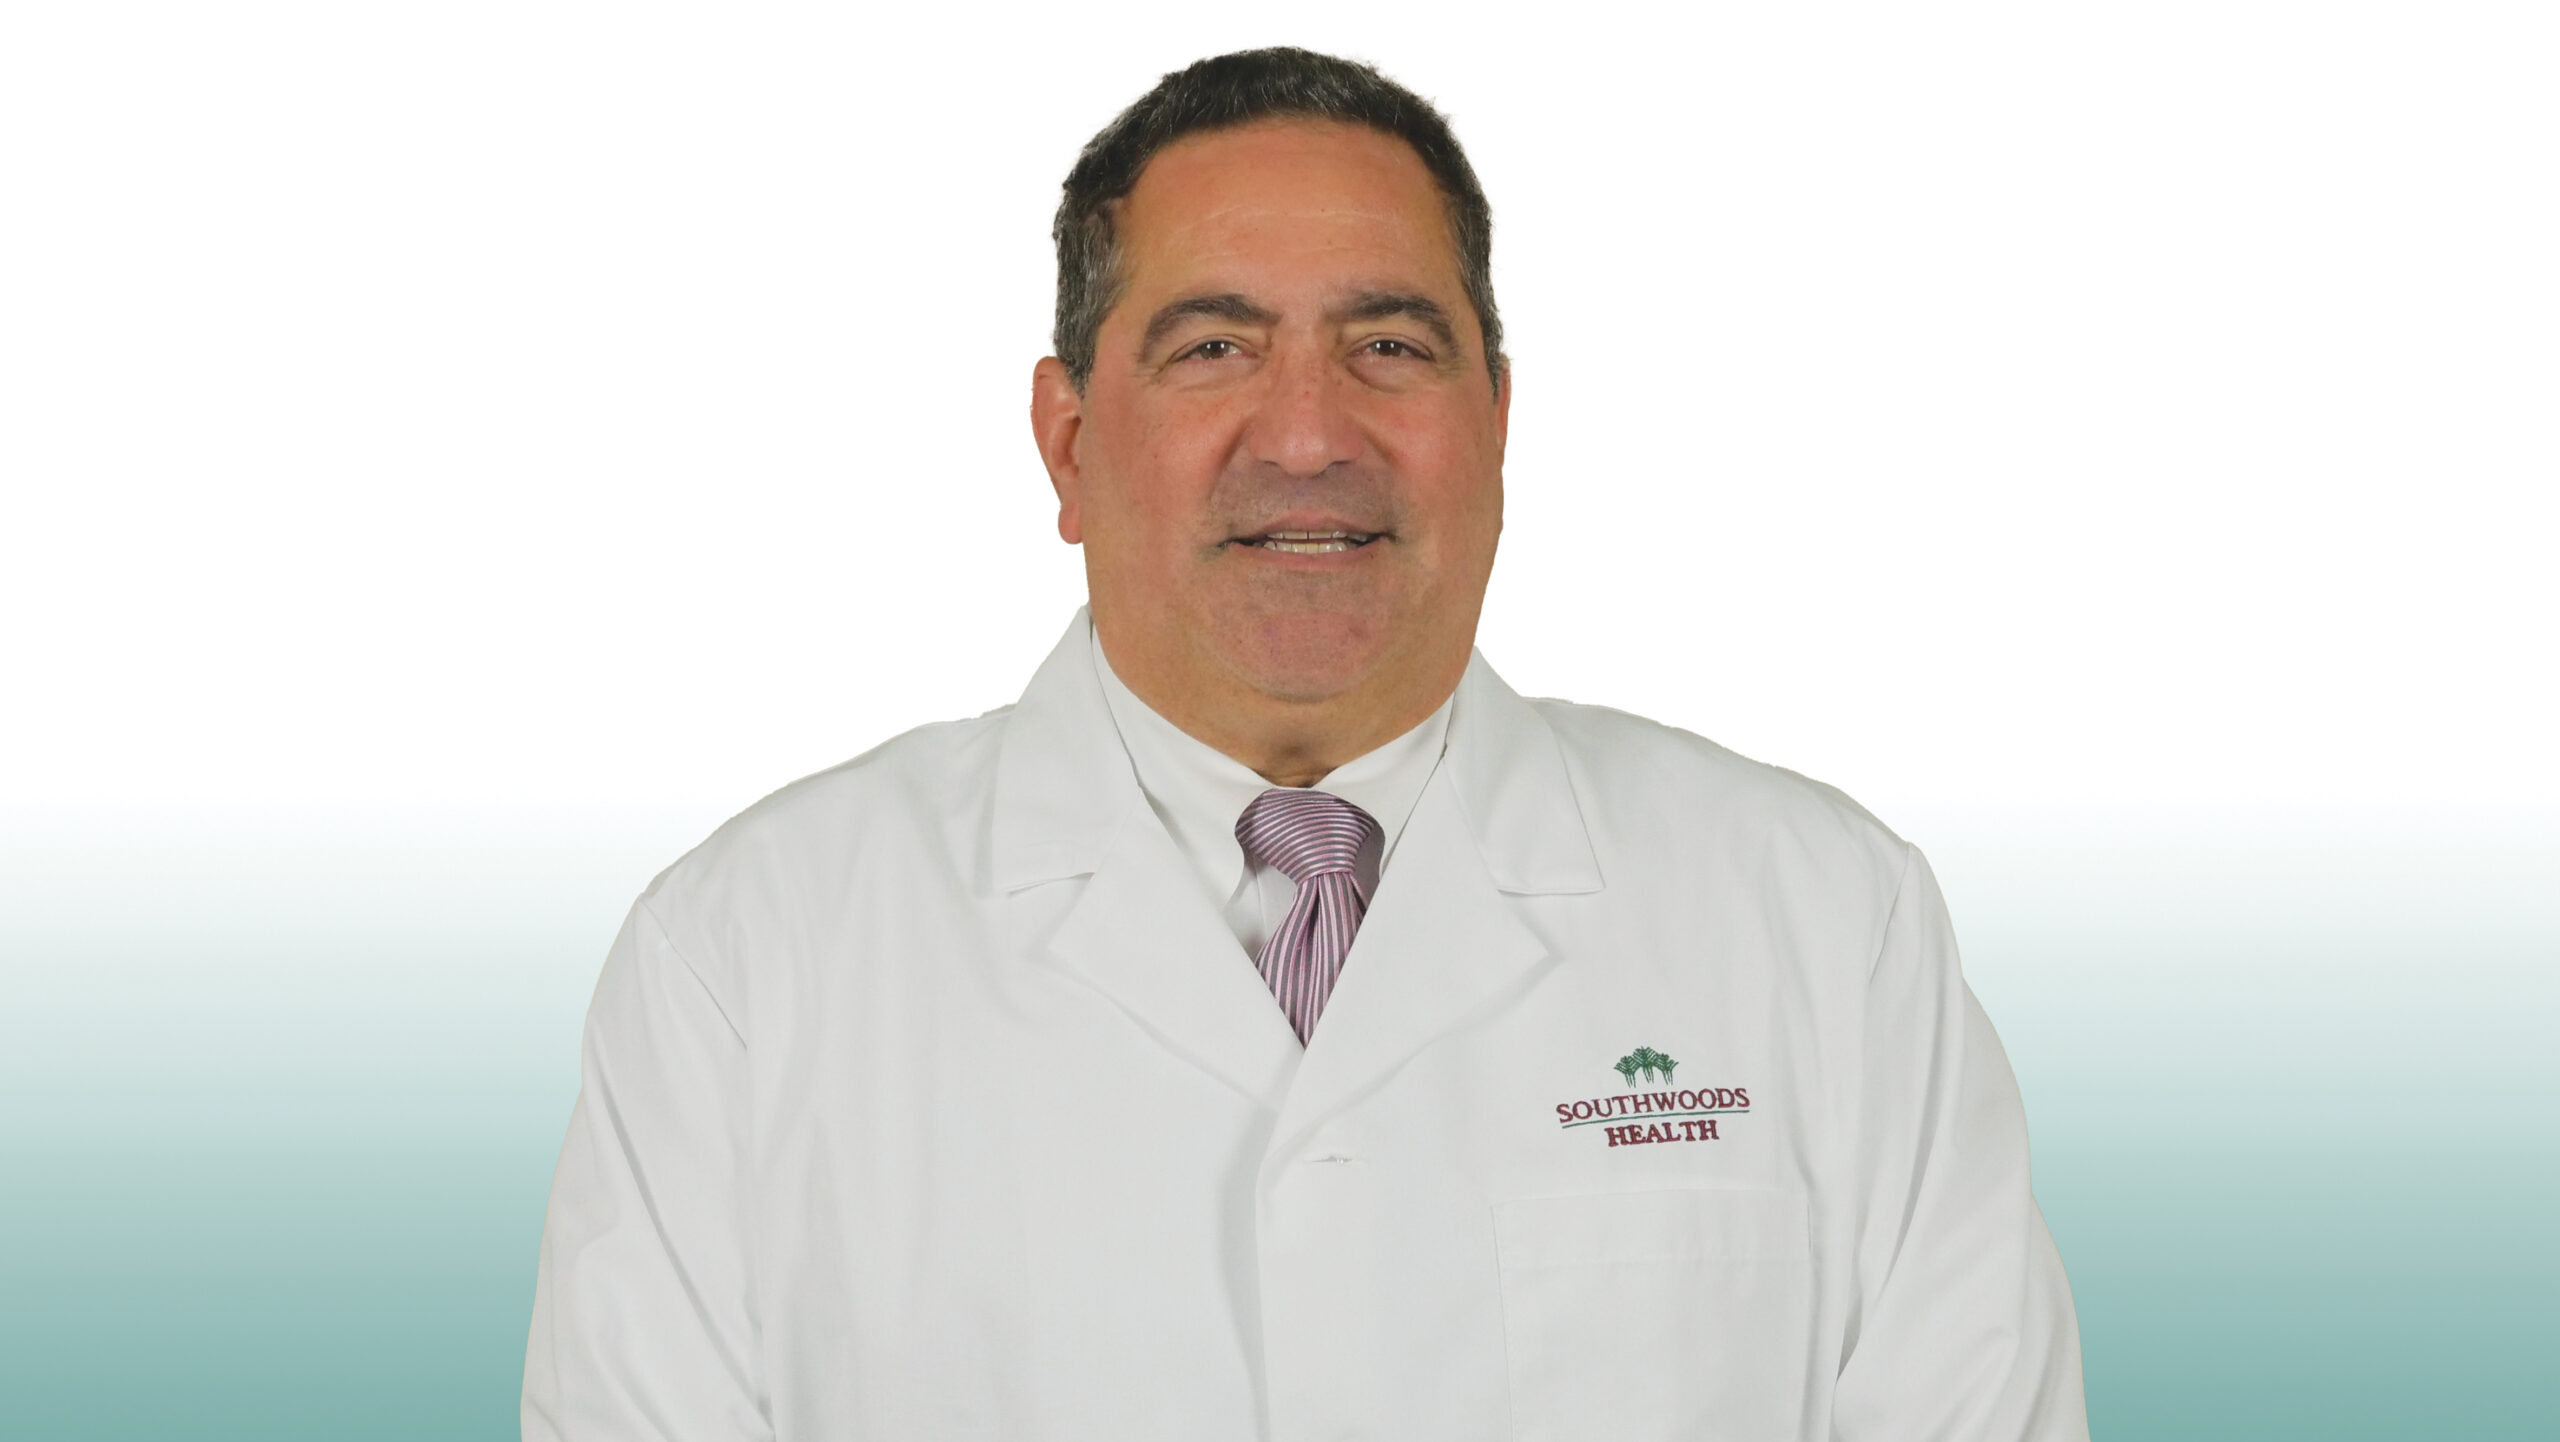 Dr Potesta - Southwoods Health in Ohio